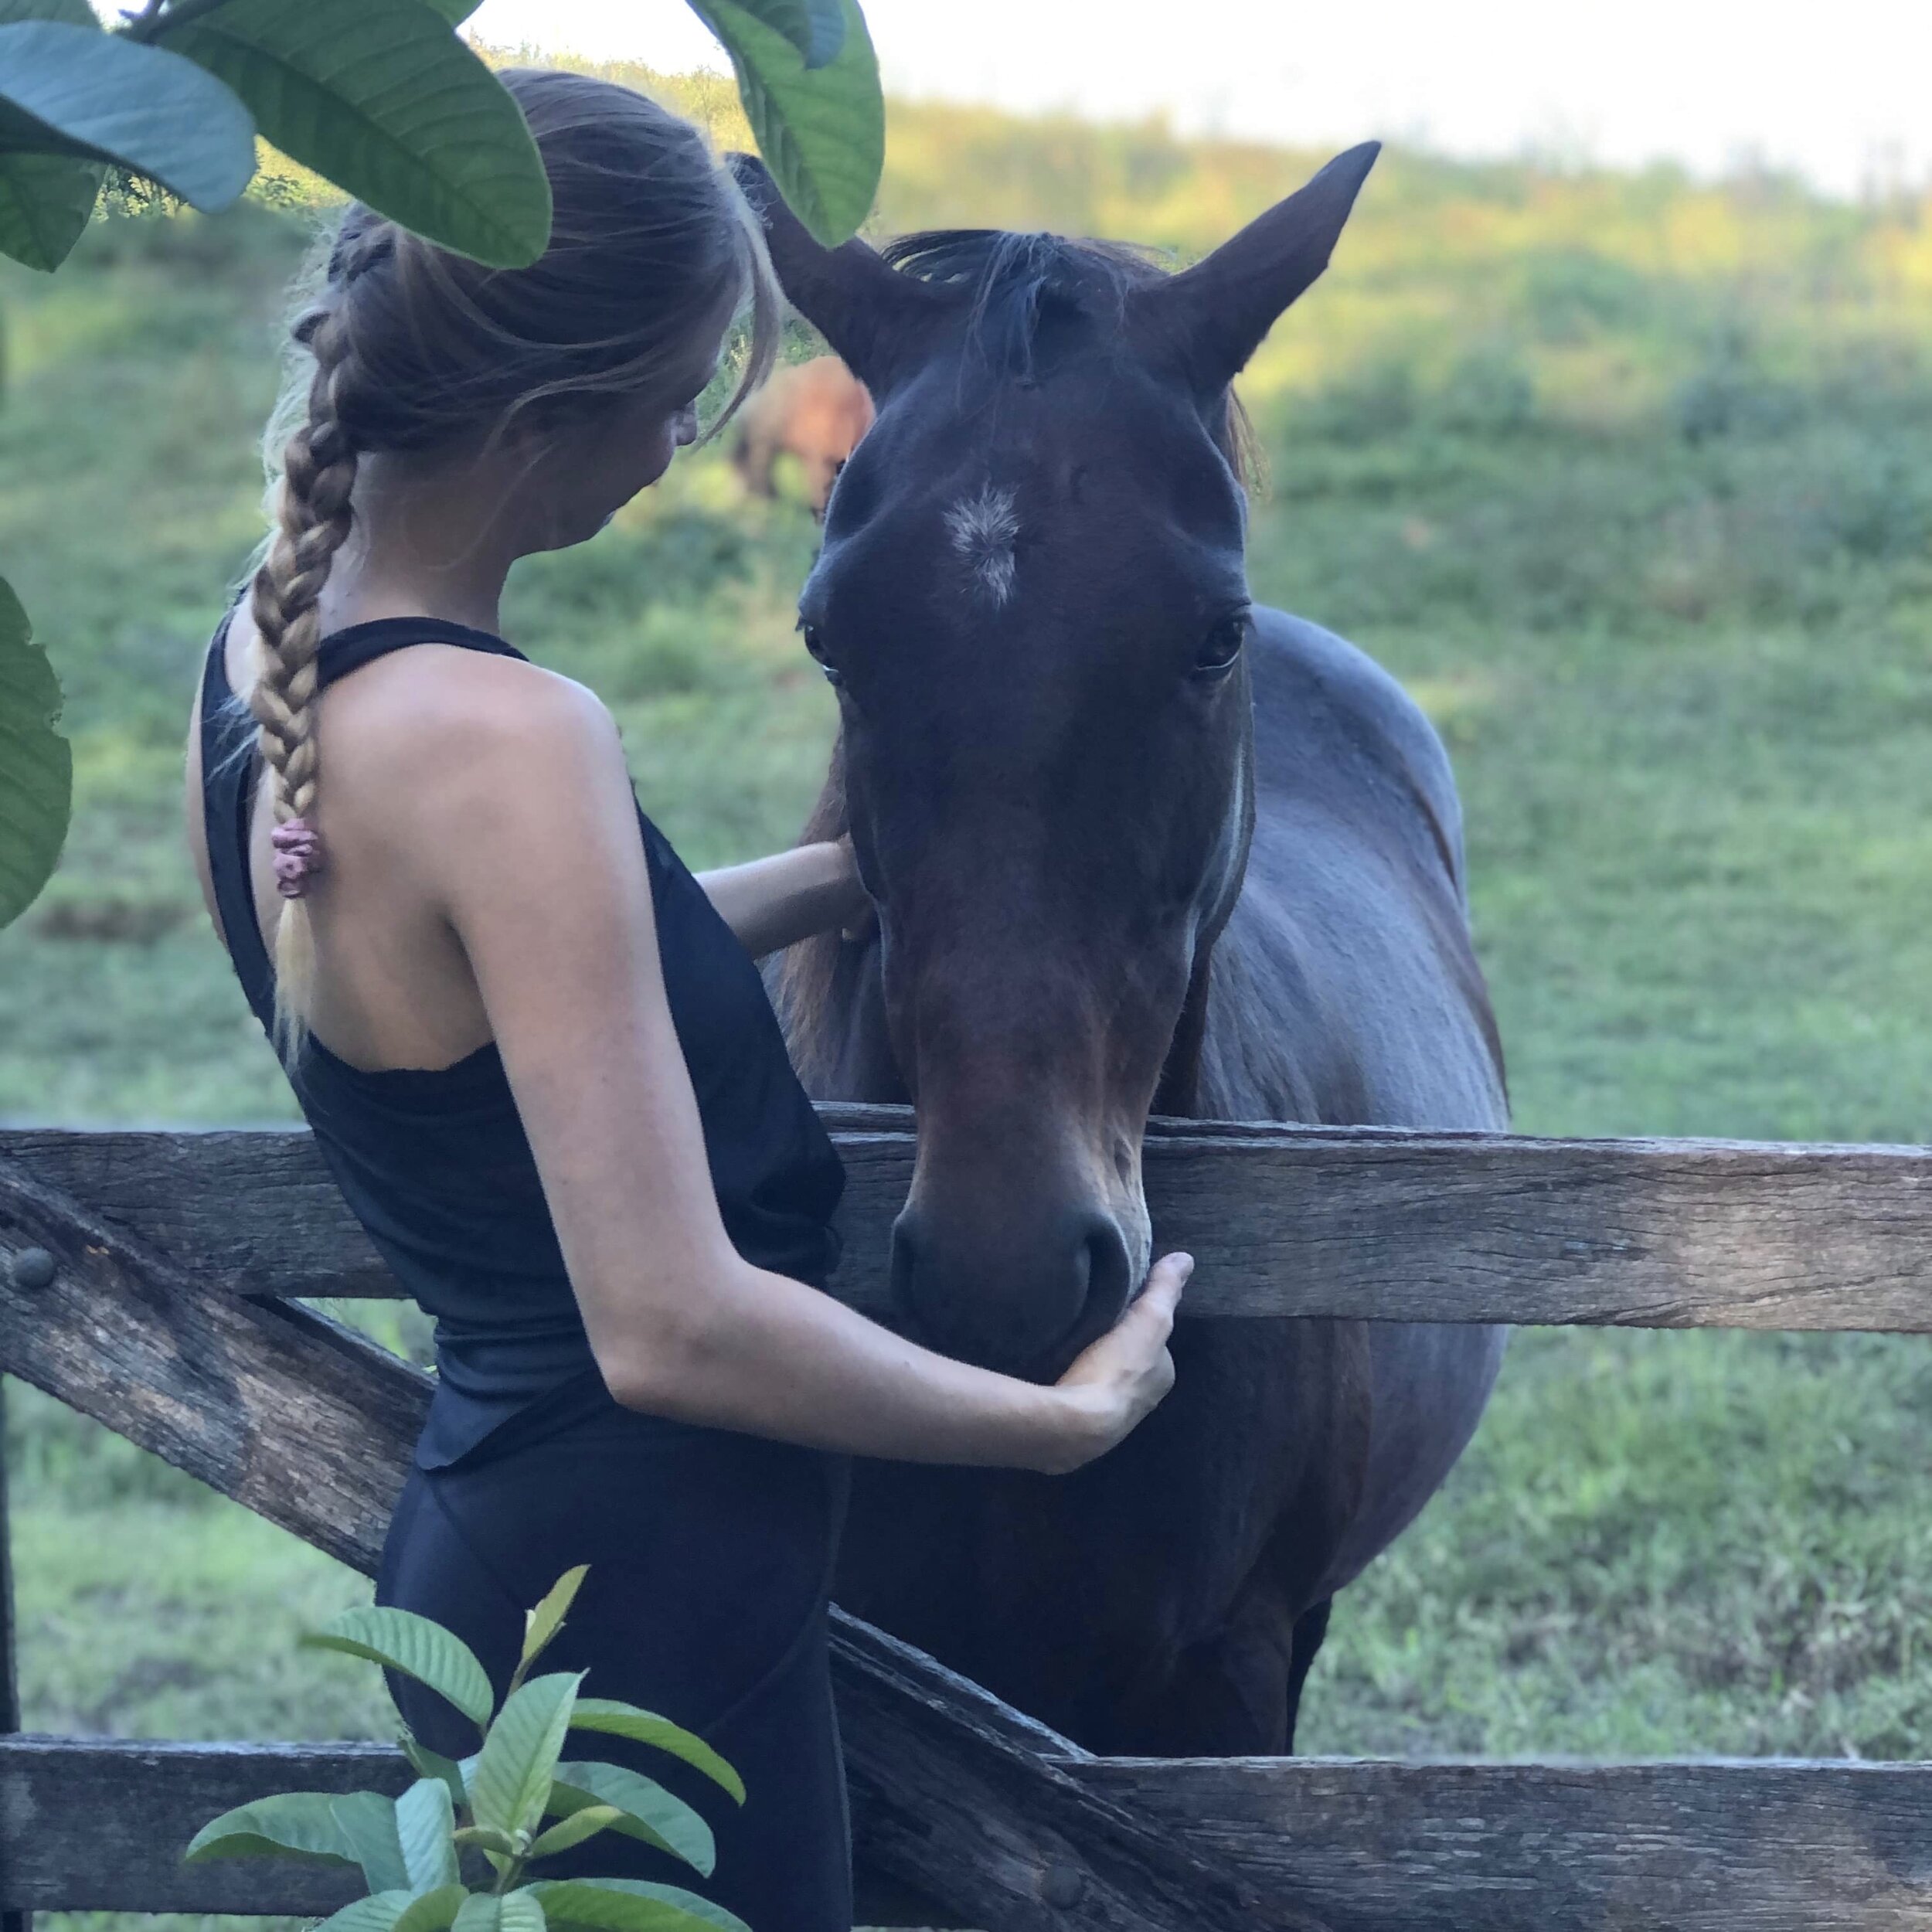 Breathwork meditation cacao ceremony mindfulness Love Connection loving kindness woman’s circle sacred sisters one with nature conscious Connections horse lover nature lover 654.jpg